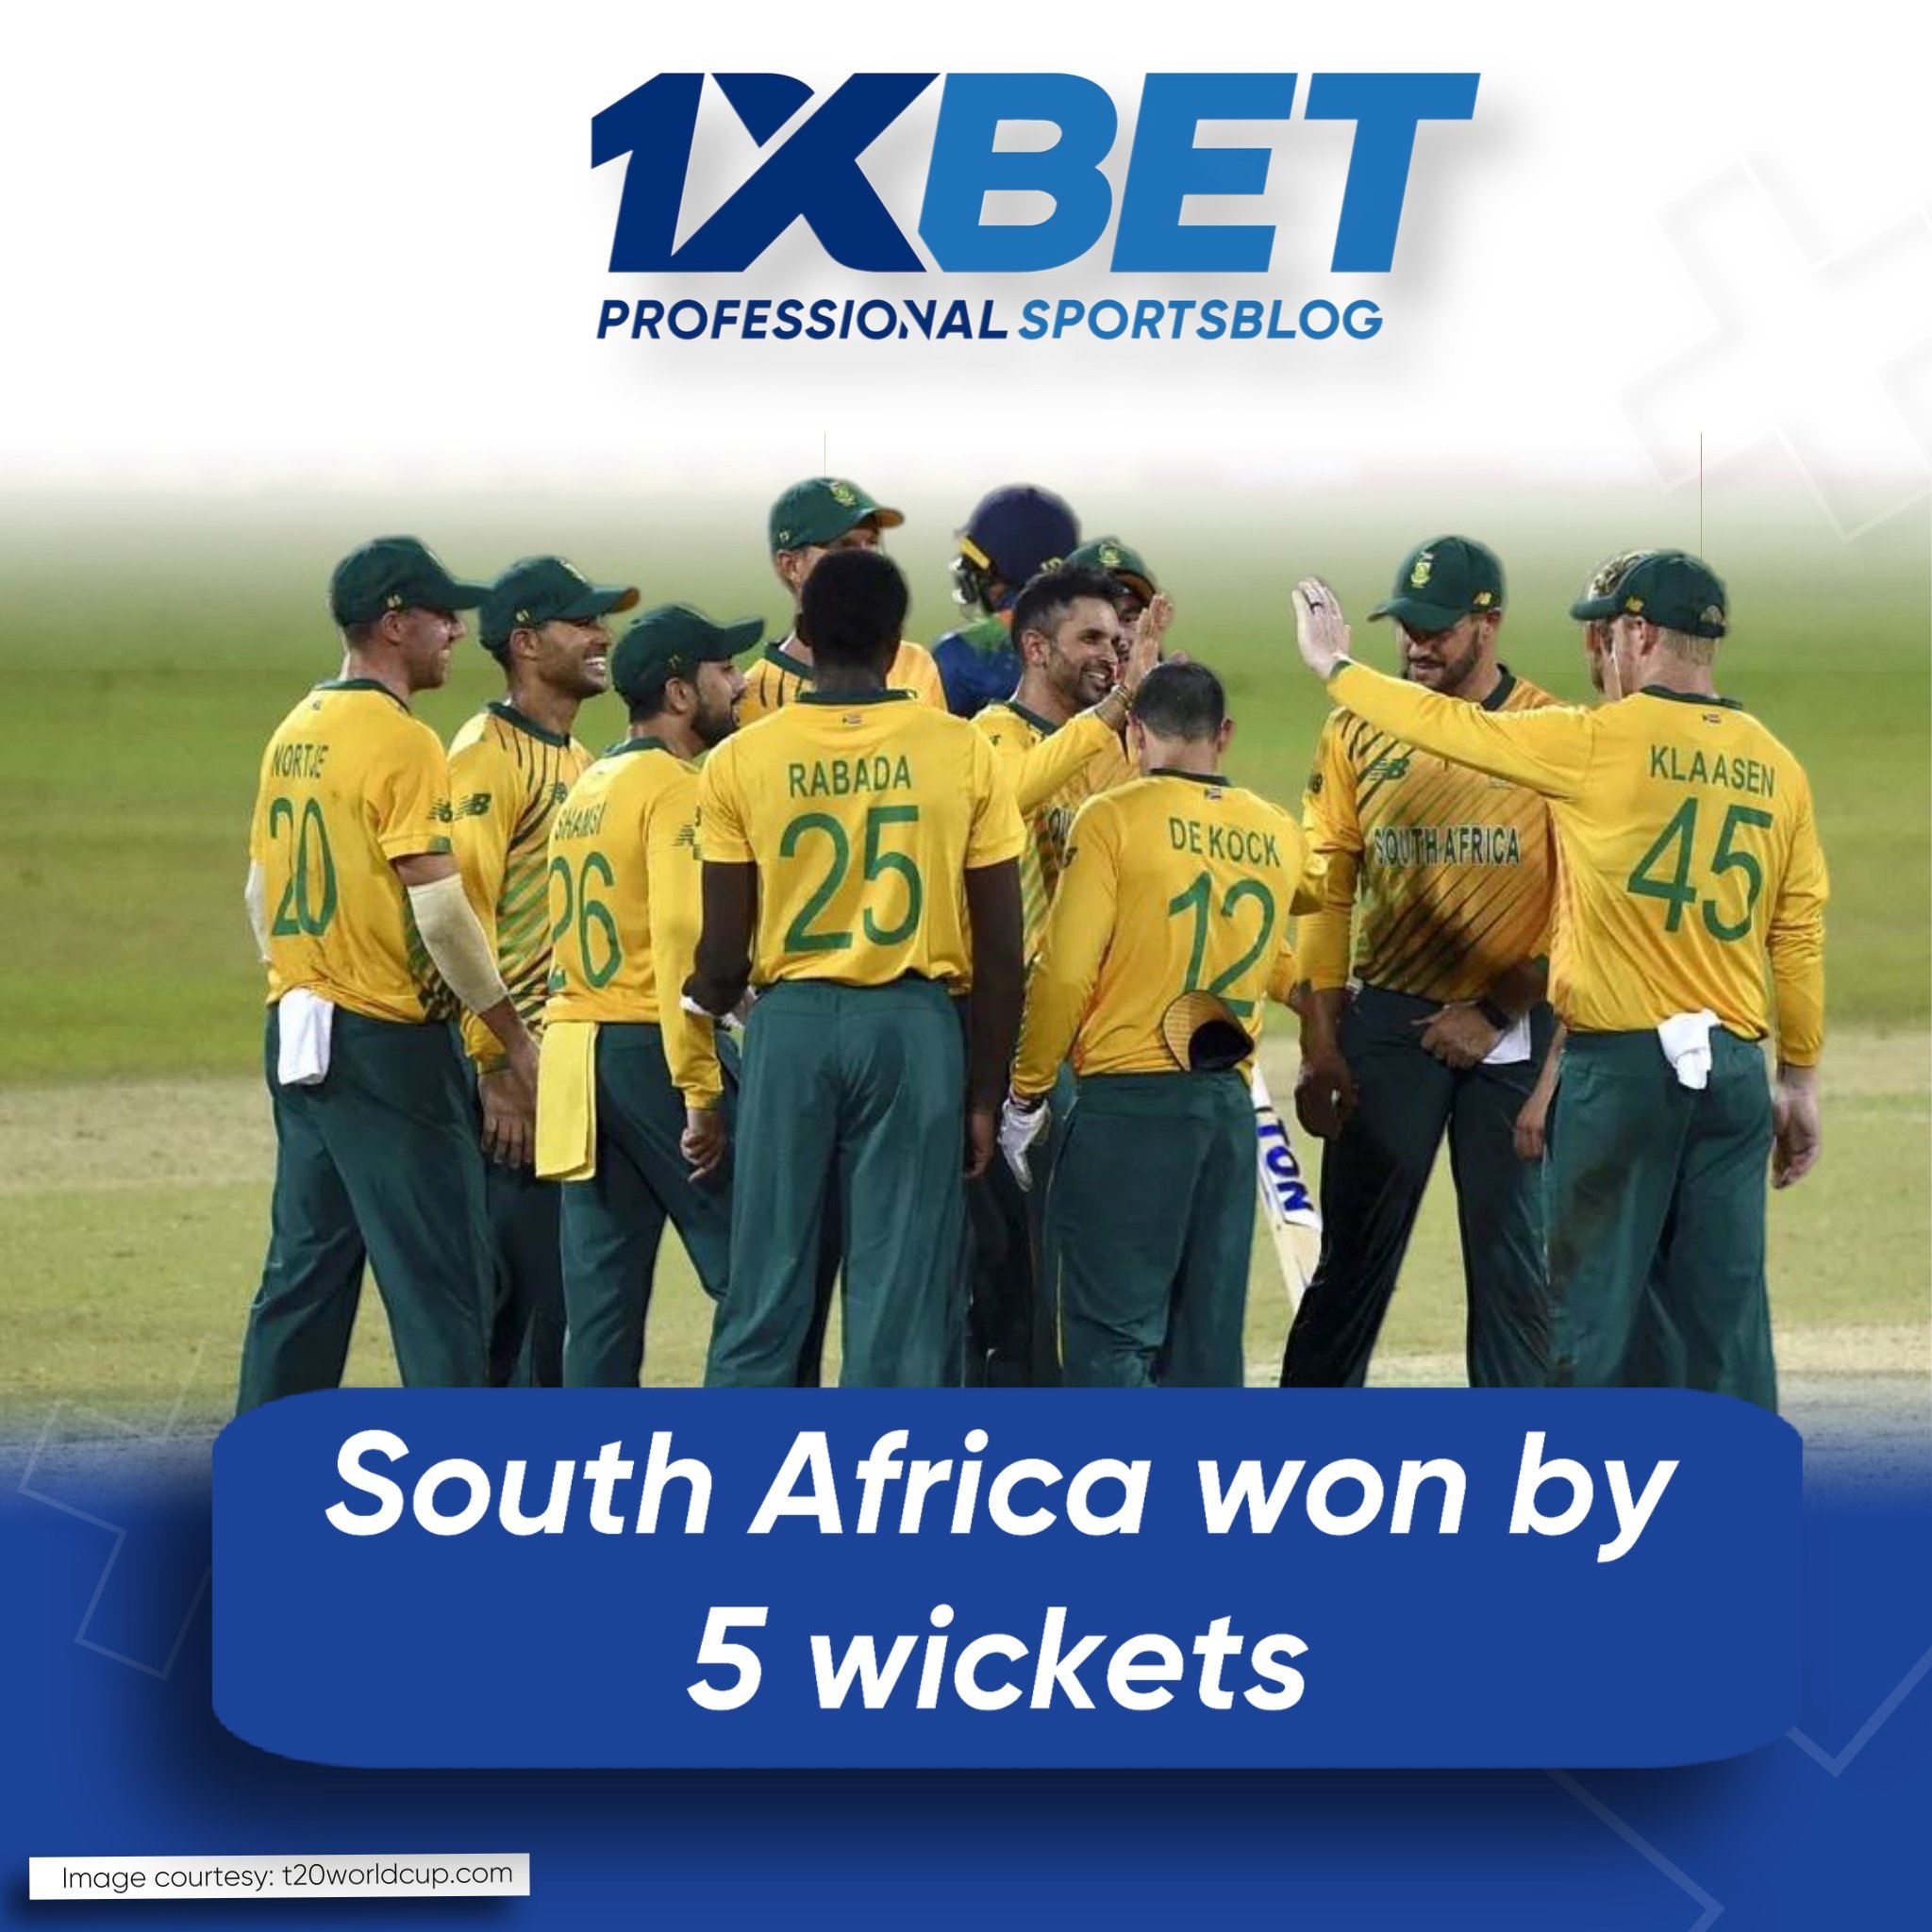 South Africa won by 5 wickets